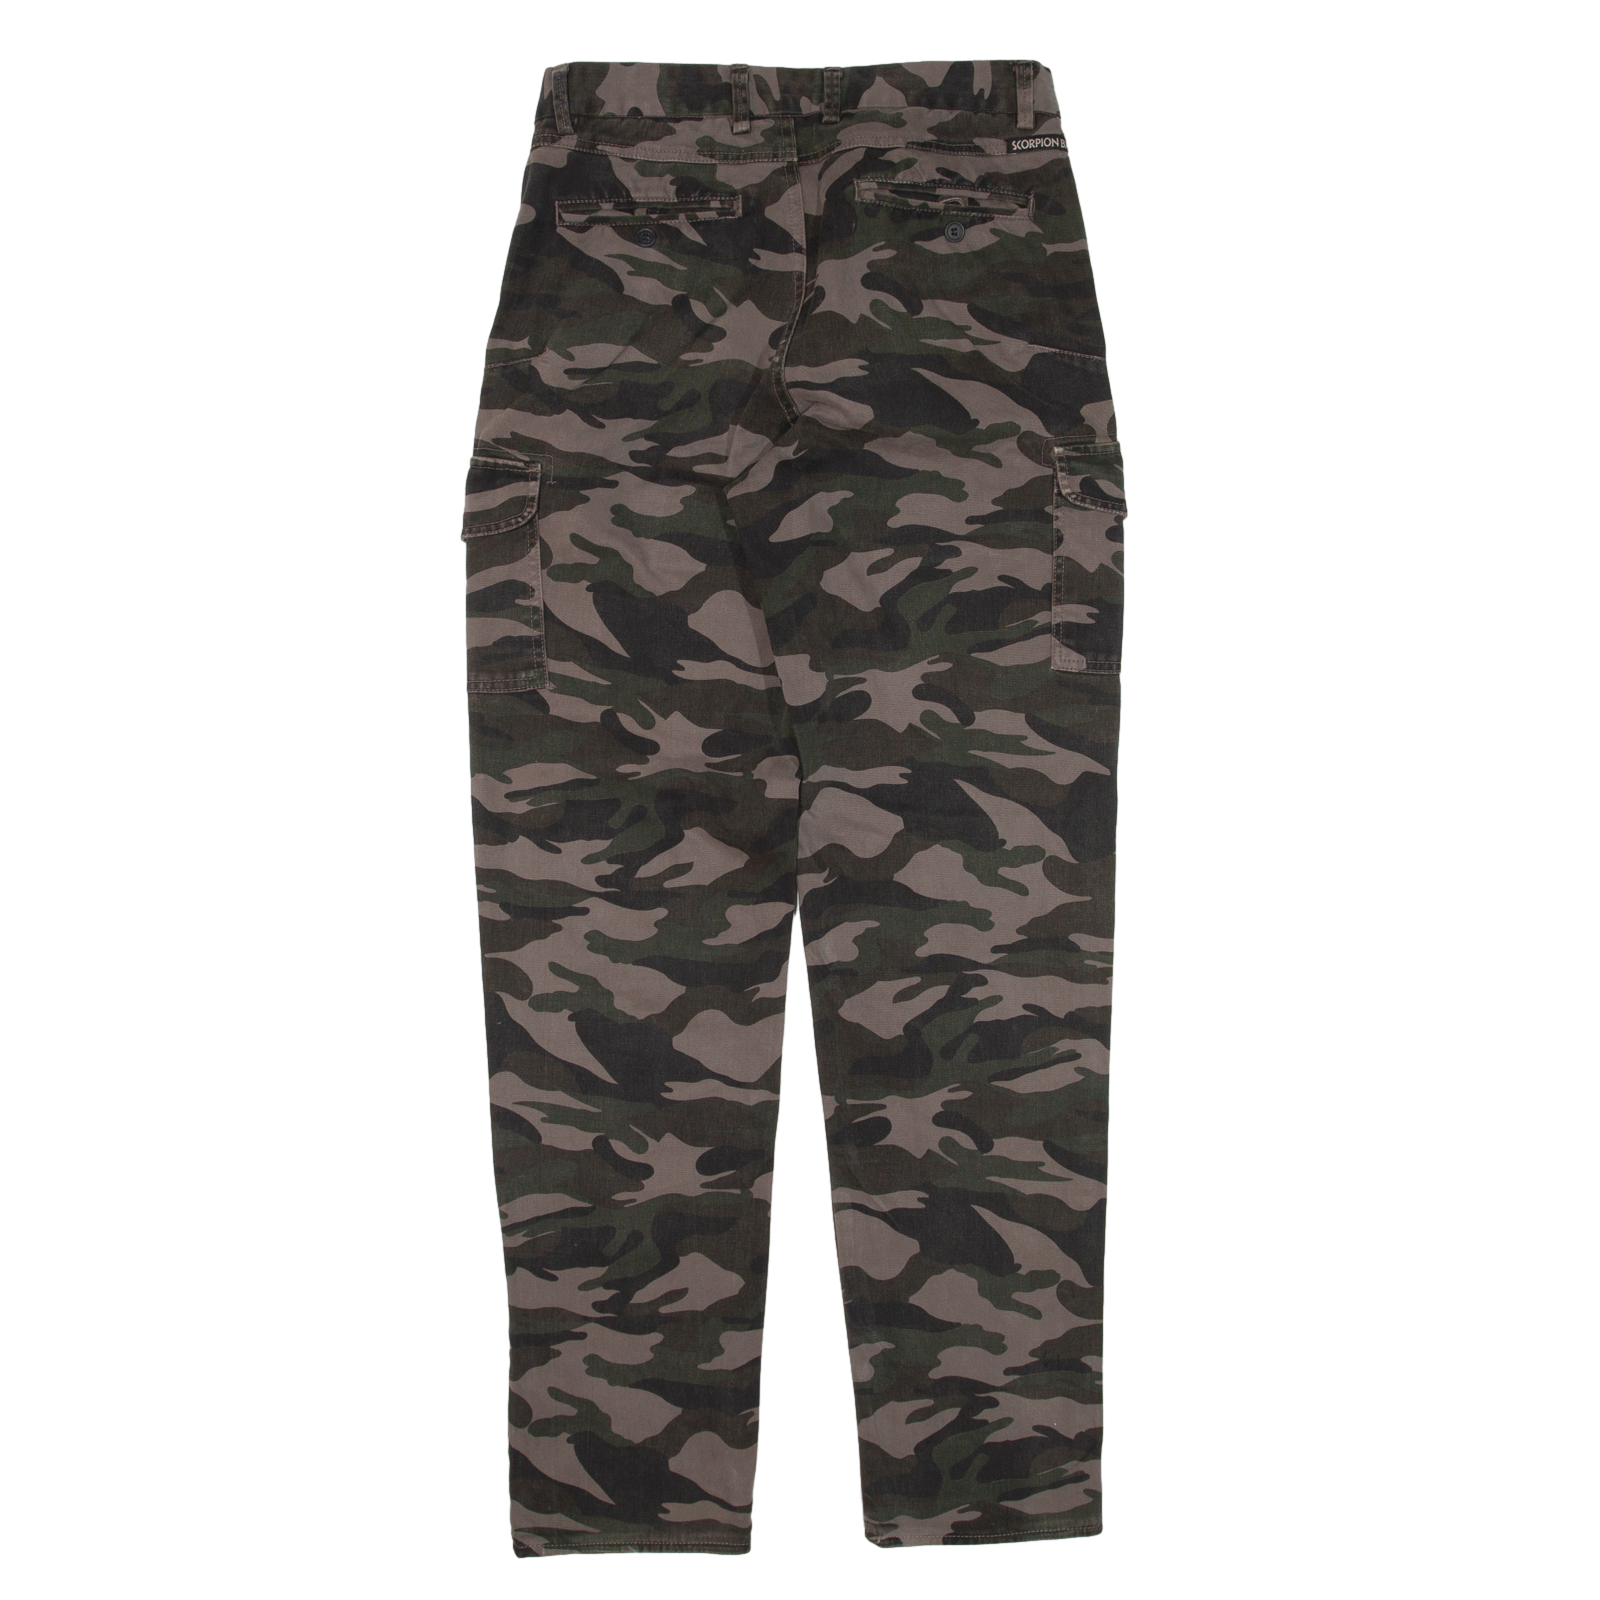 Grey Camo Print Cargo Trousers | PrettyLittleThing